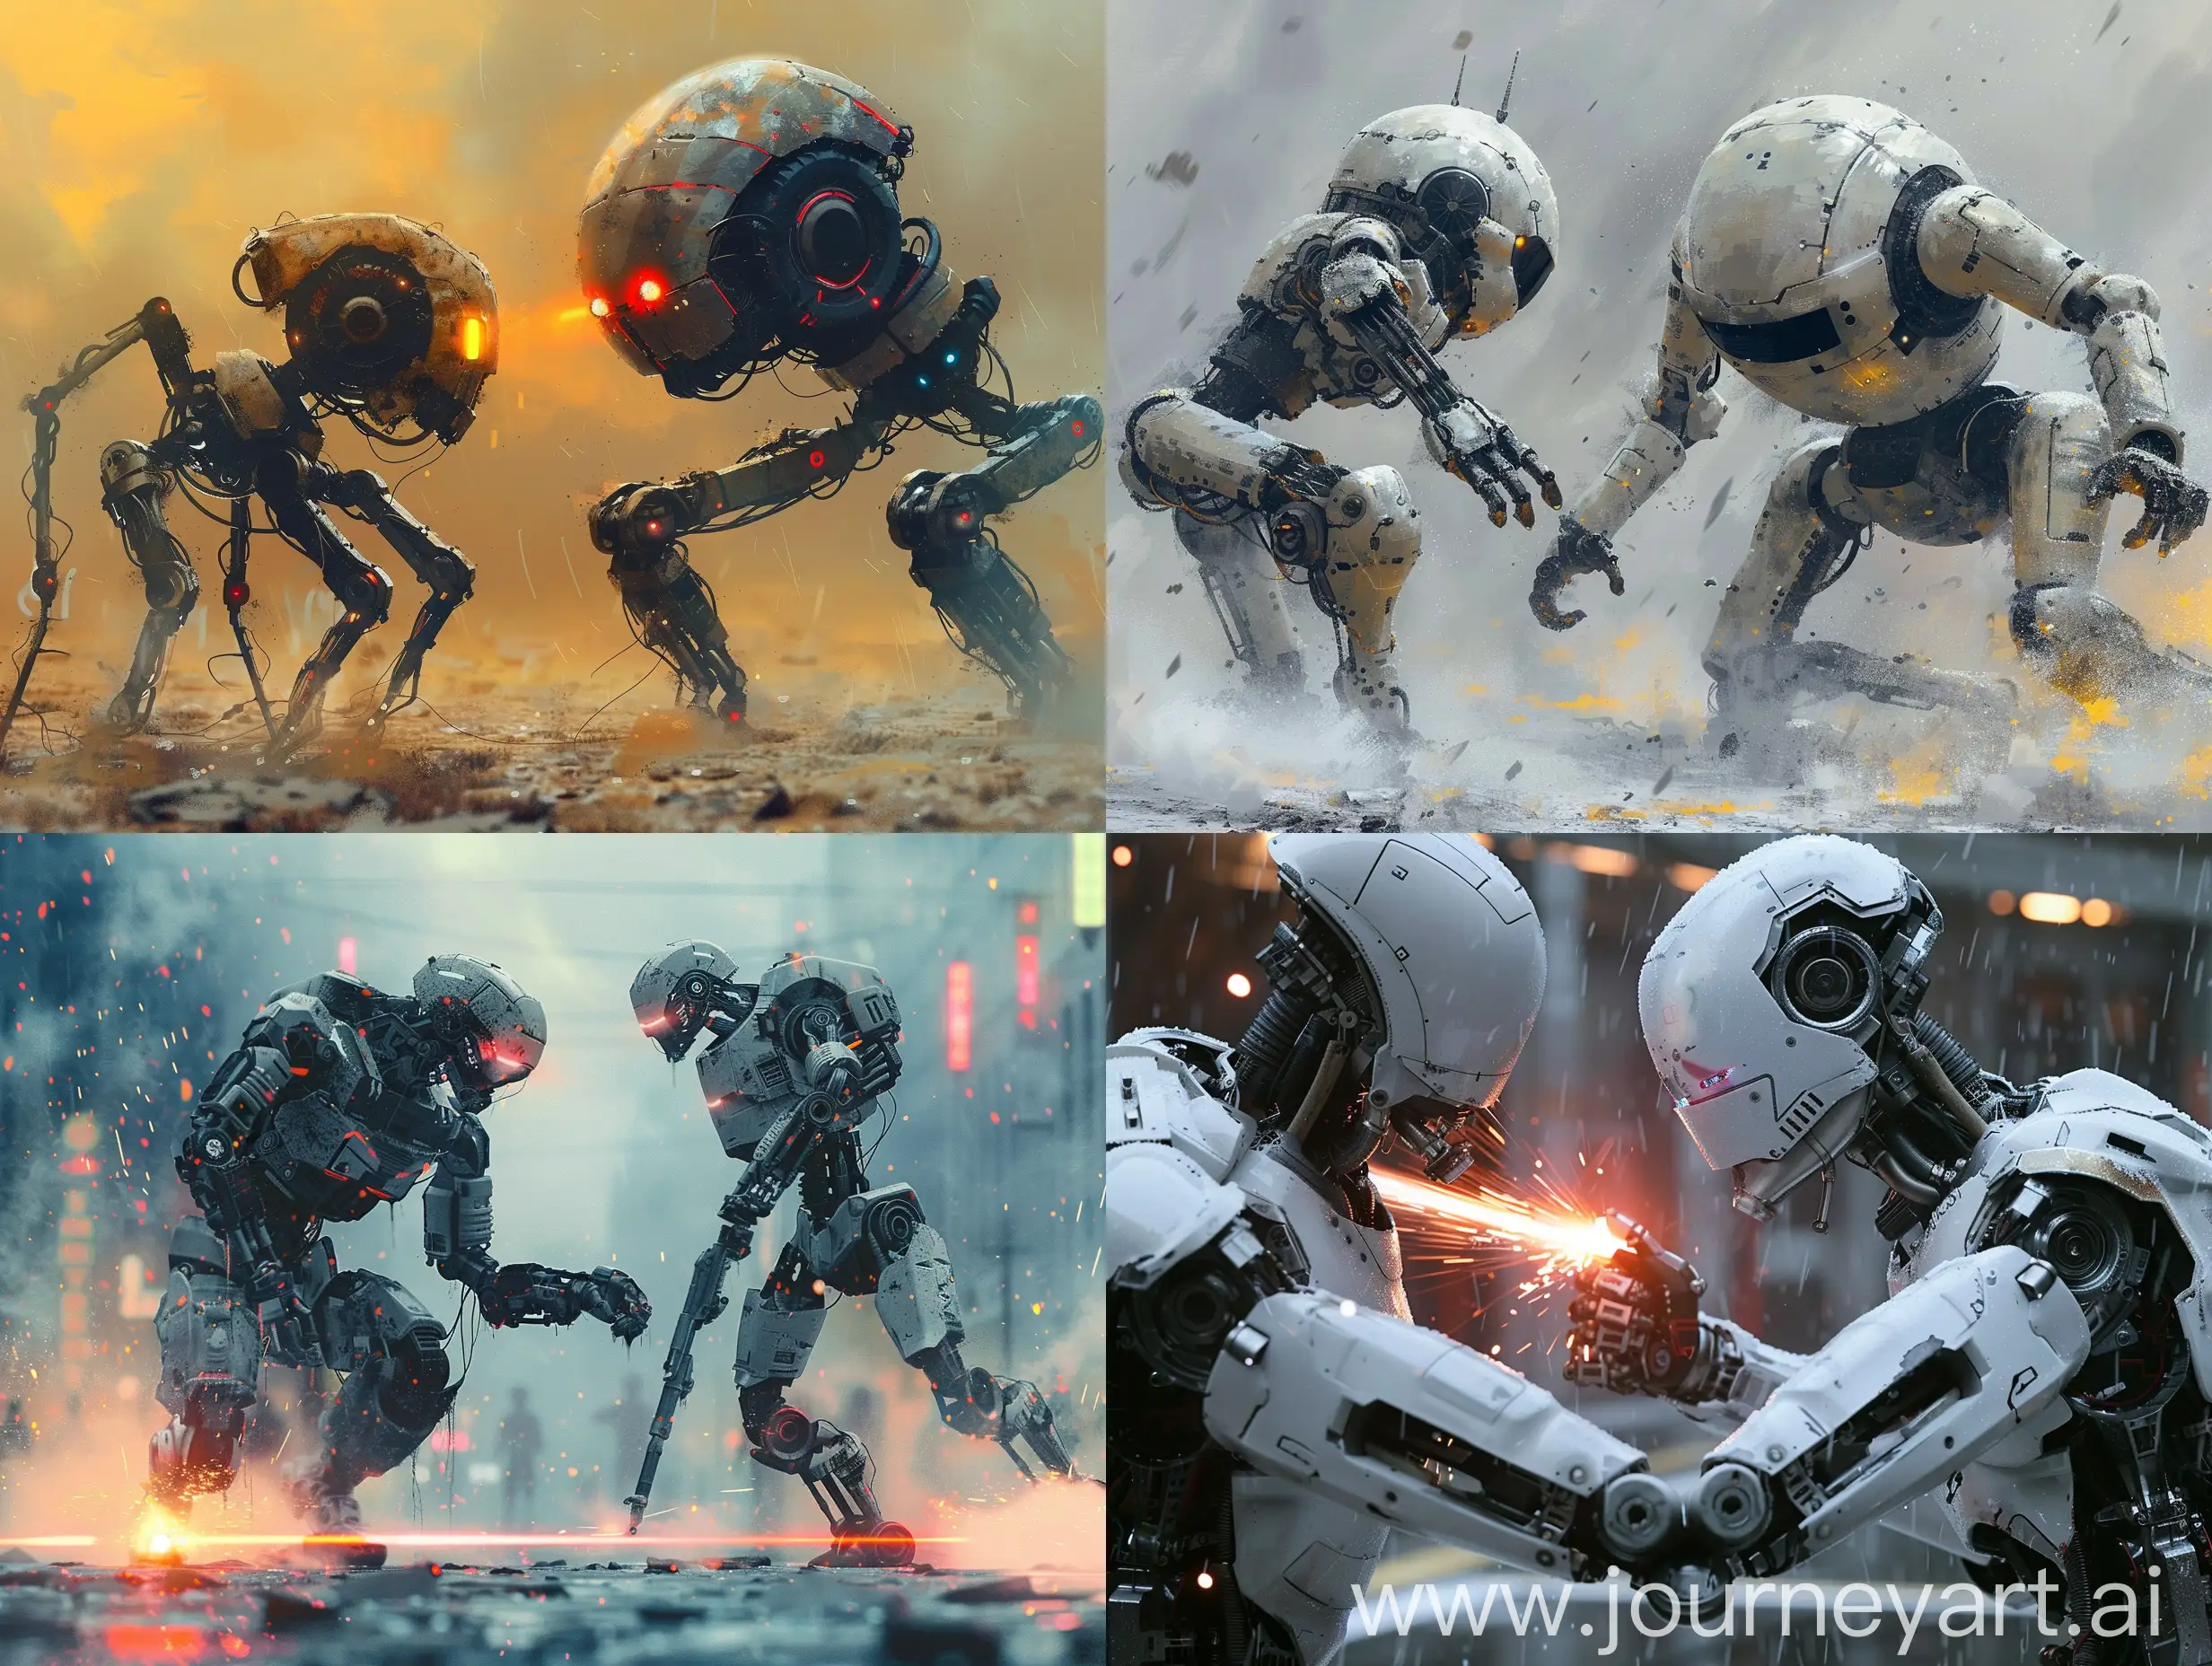 Epic-SciFi-Battle-of-Two-Robots-with-High-Contrast